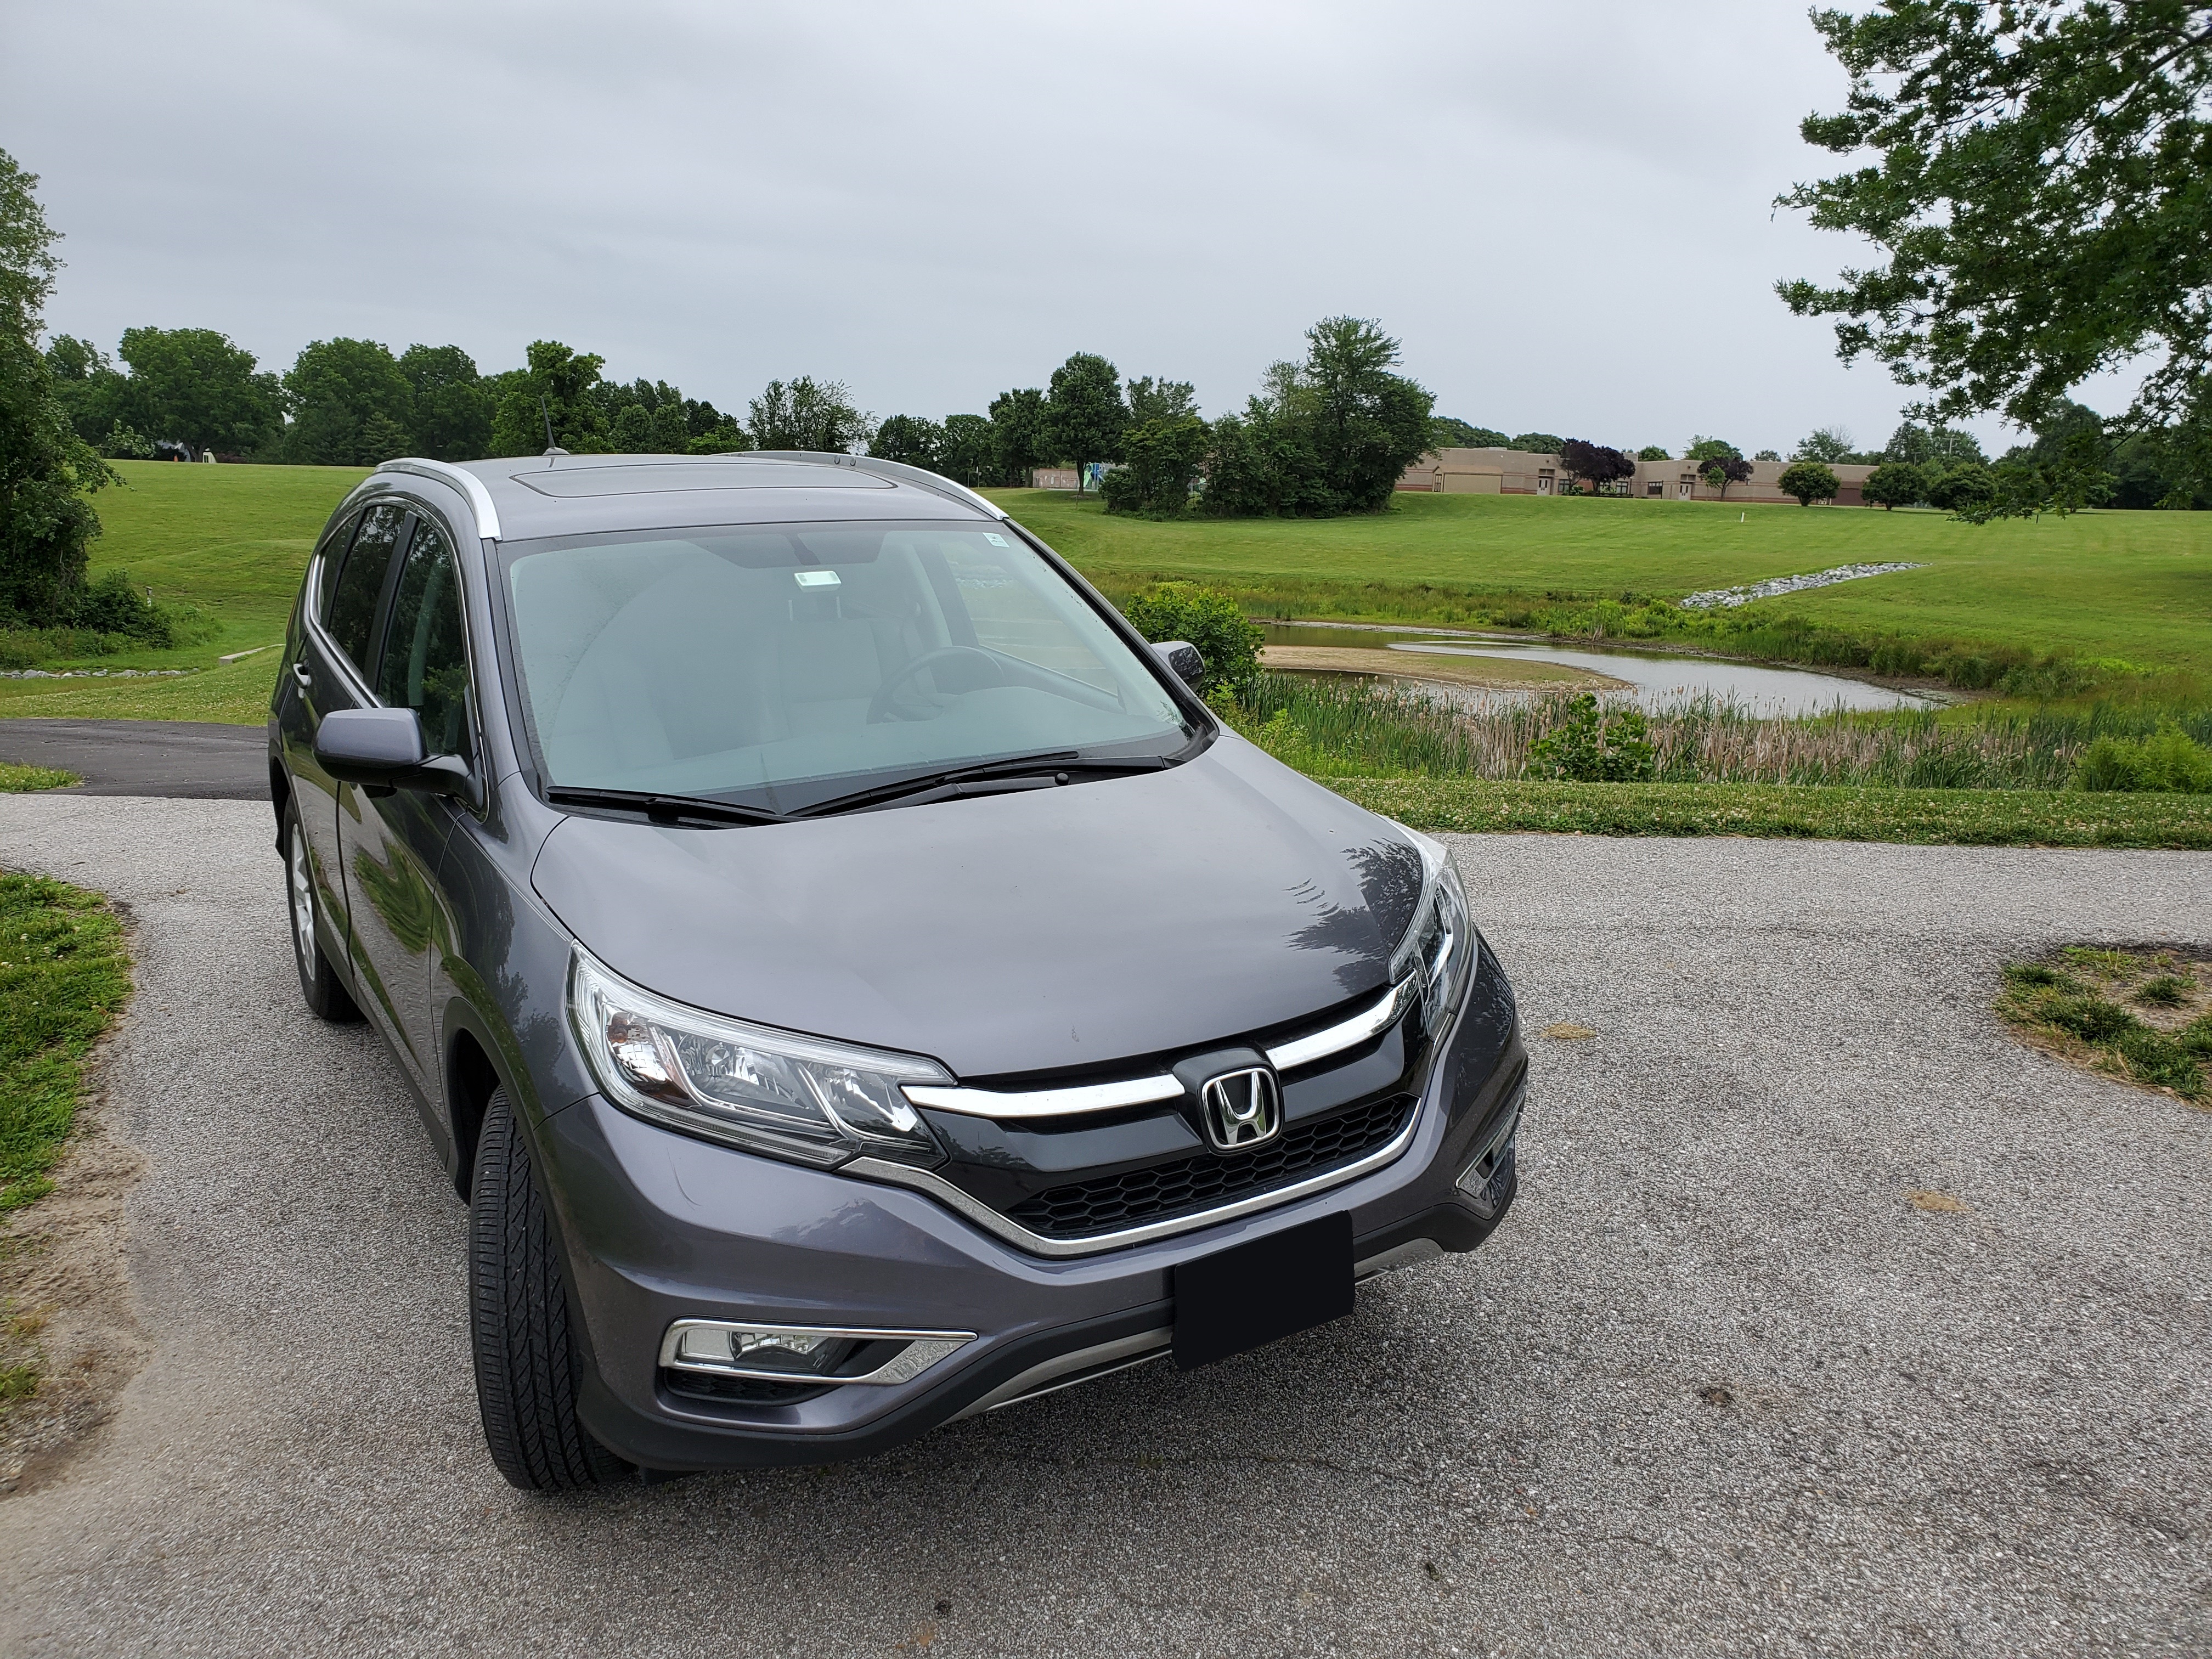 Honda CR-V: The official car of coming out to your parents on a road trip.